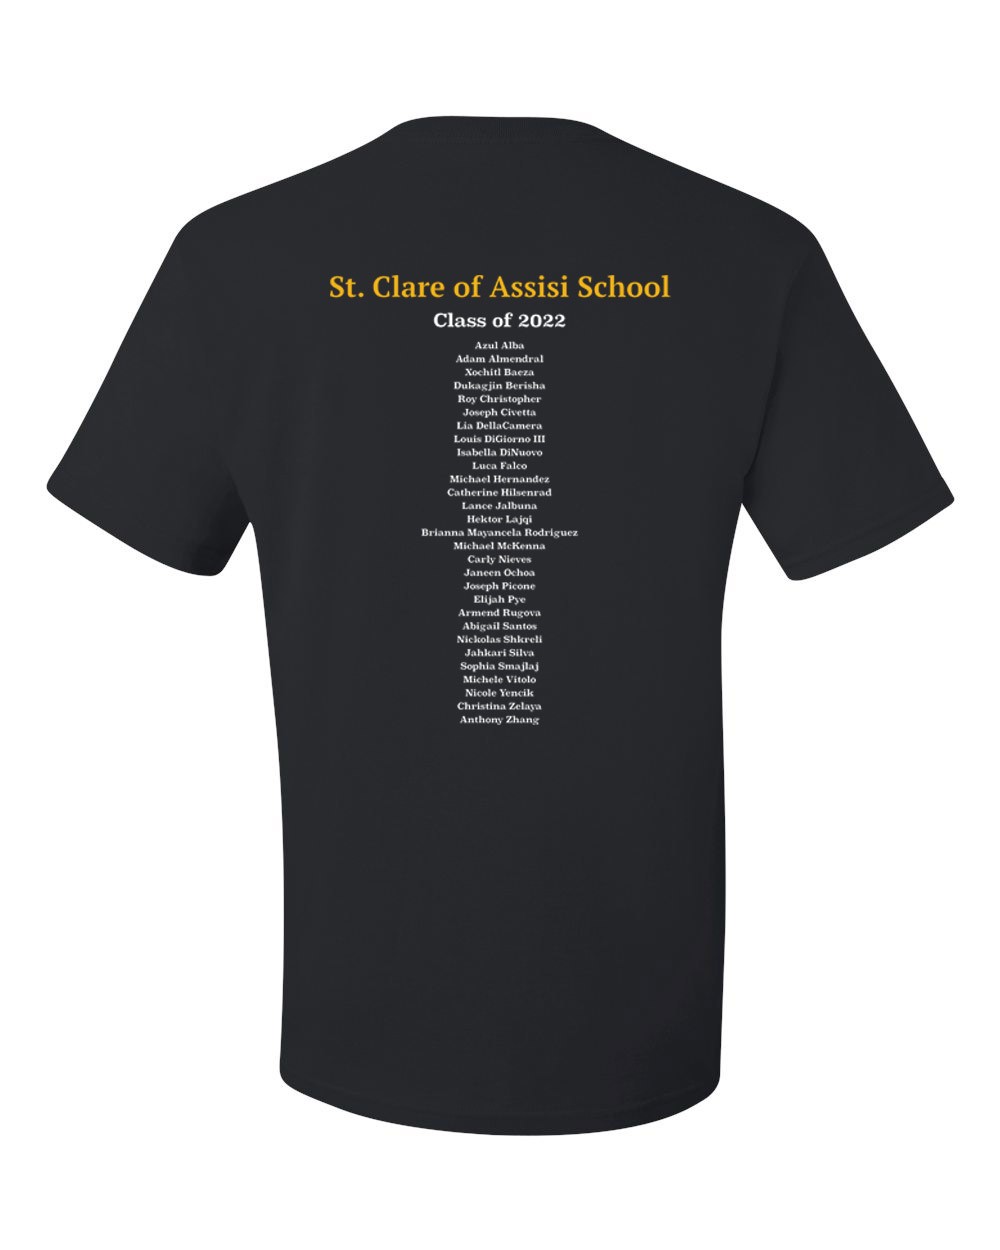 SCAS Class of 2022 T-shirt w/Logo - Please Allow 2-3 Weeks for Delivery